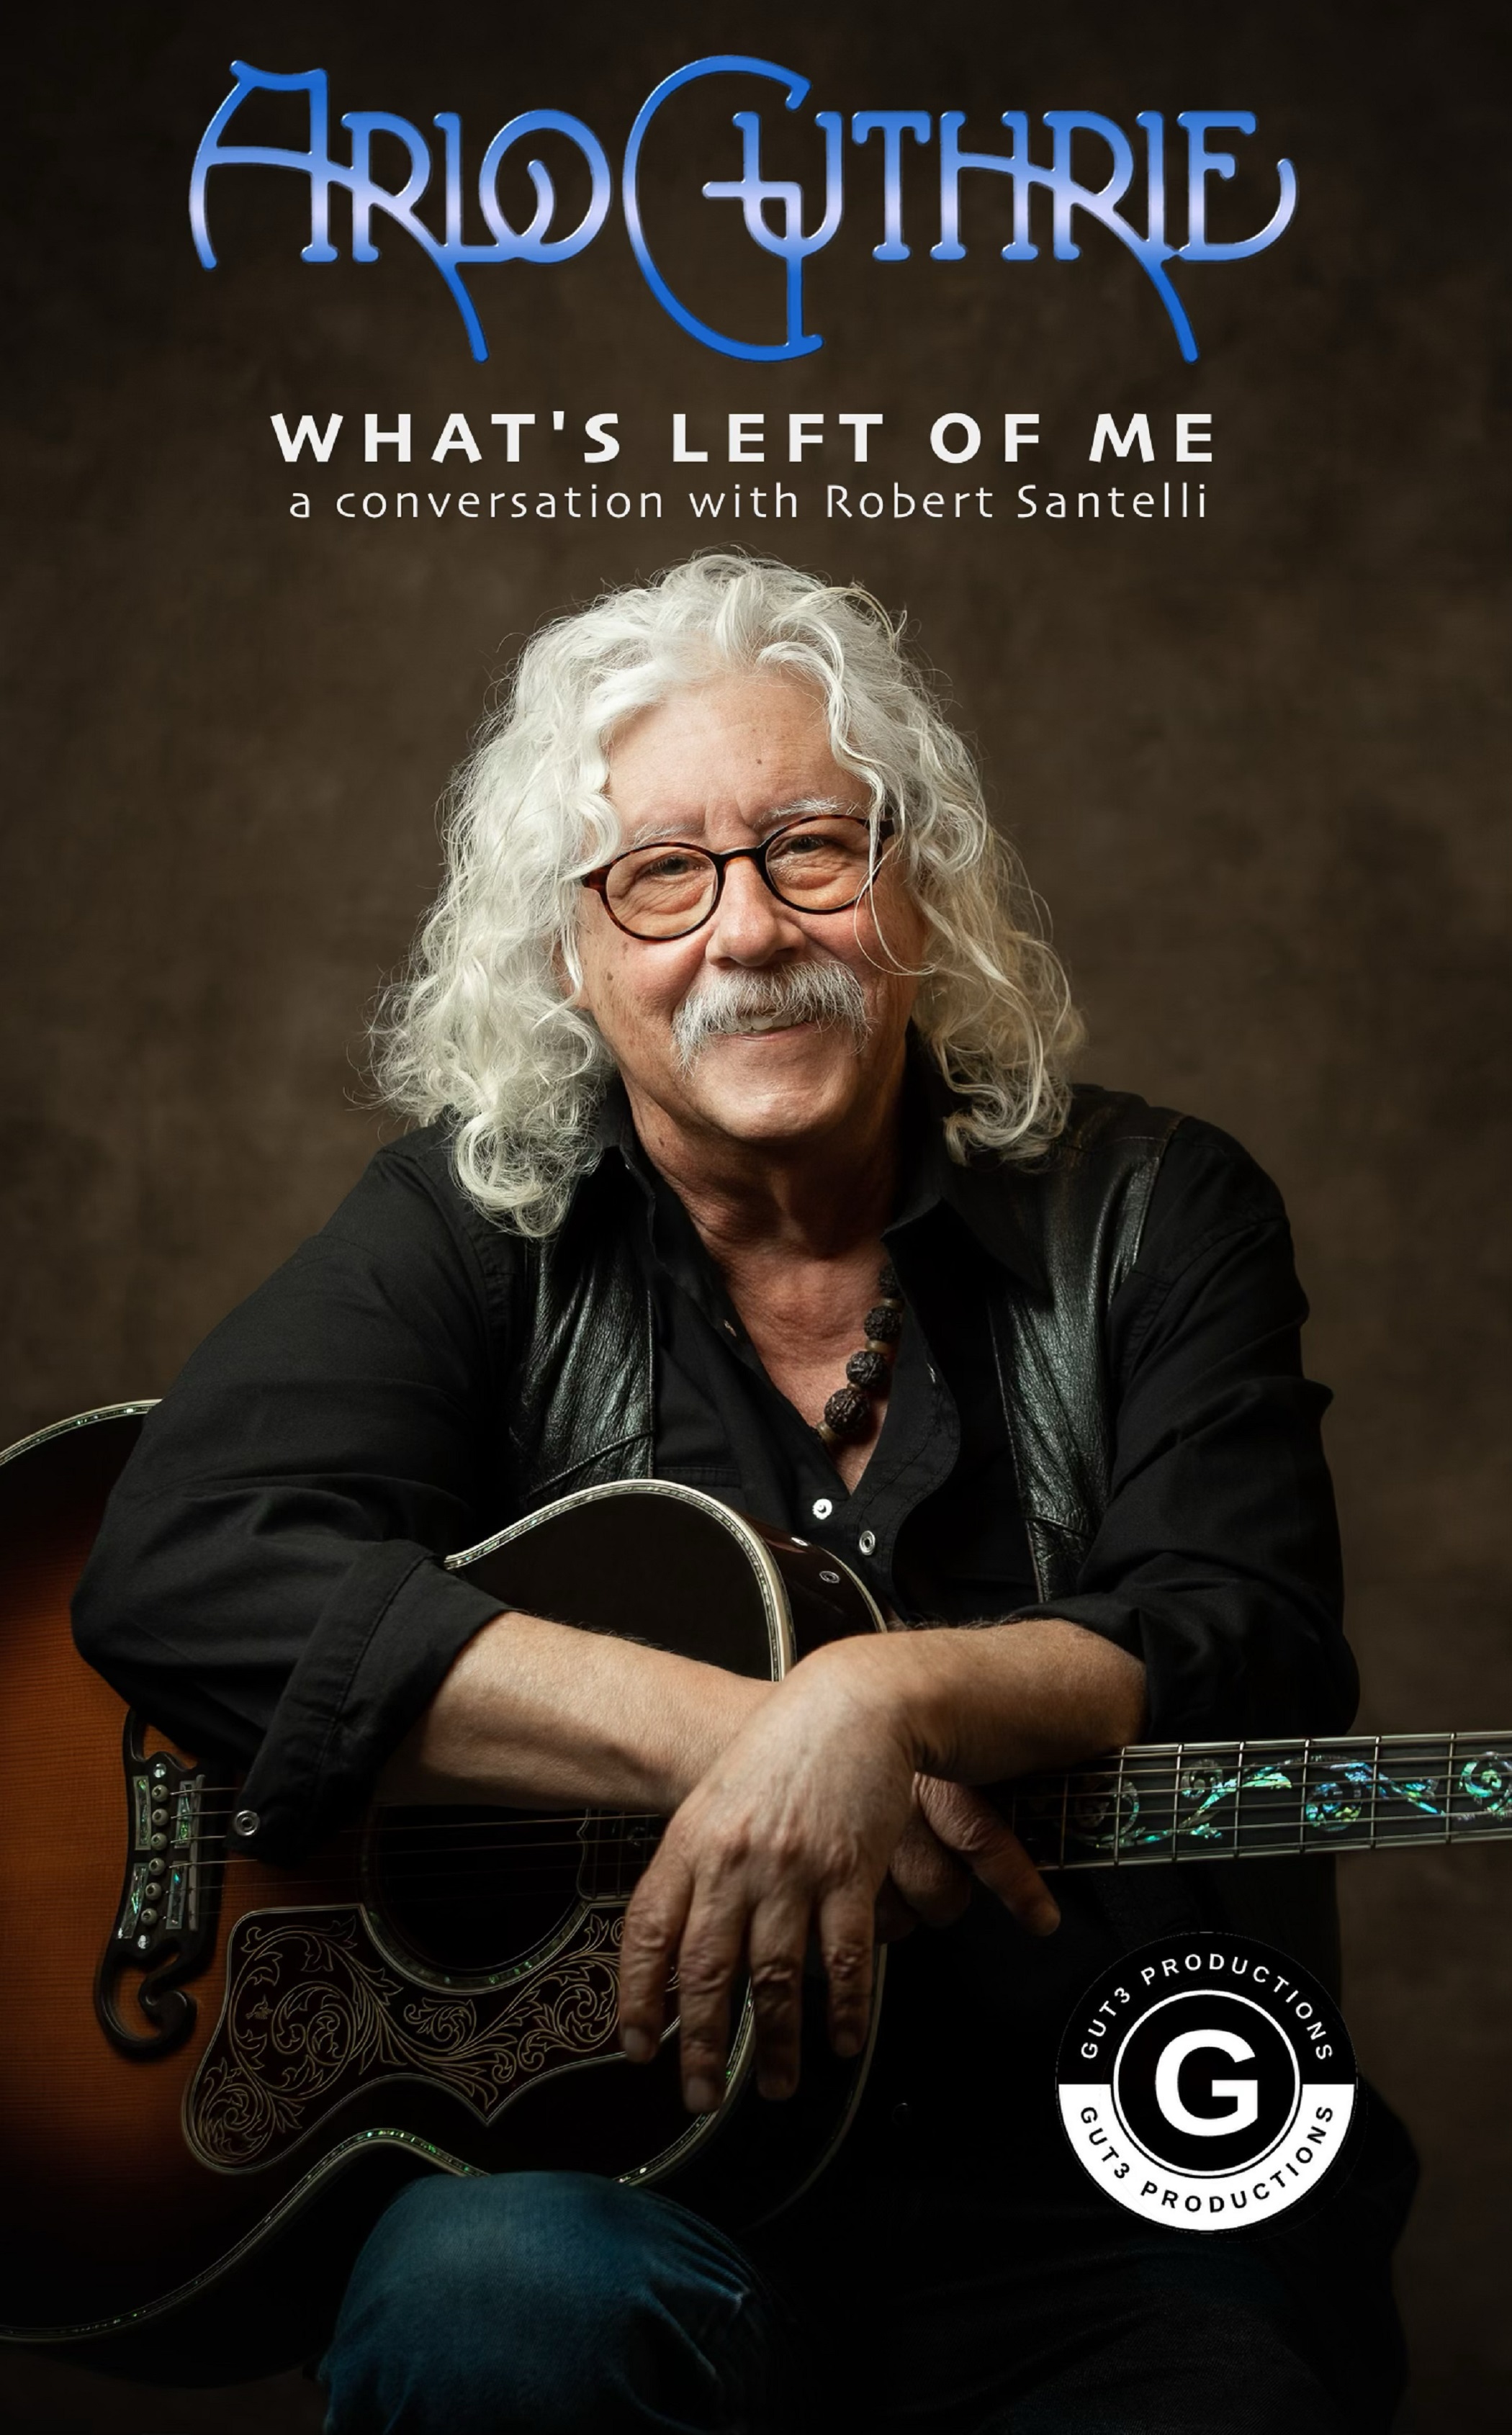 American Folk Music Icon Arlo Guthrie Returns to the Stage After 3 Years of Retirement for a New Series, "Arlo Guthrie - What's Left Of Me - A Conversation With Bob Santelli"